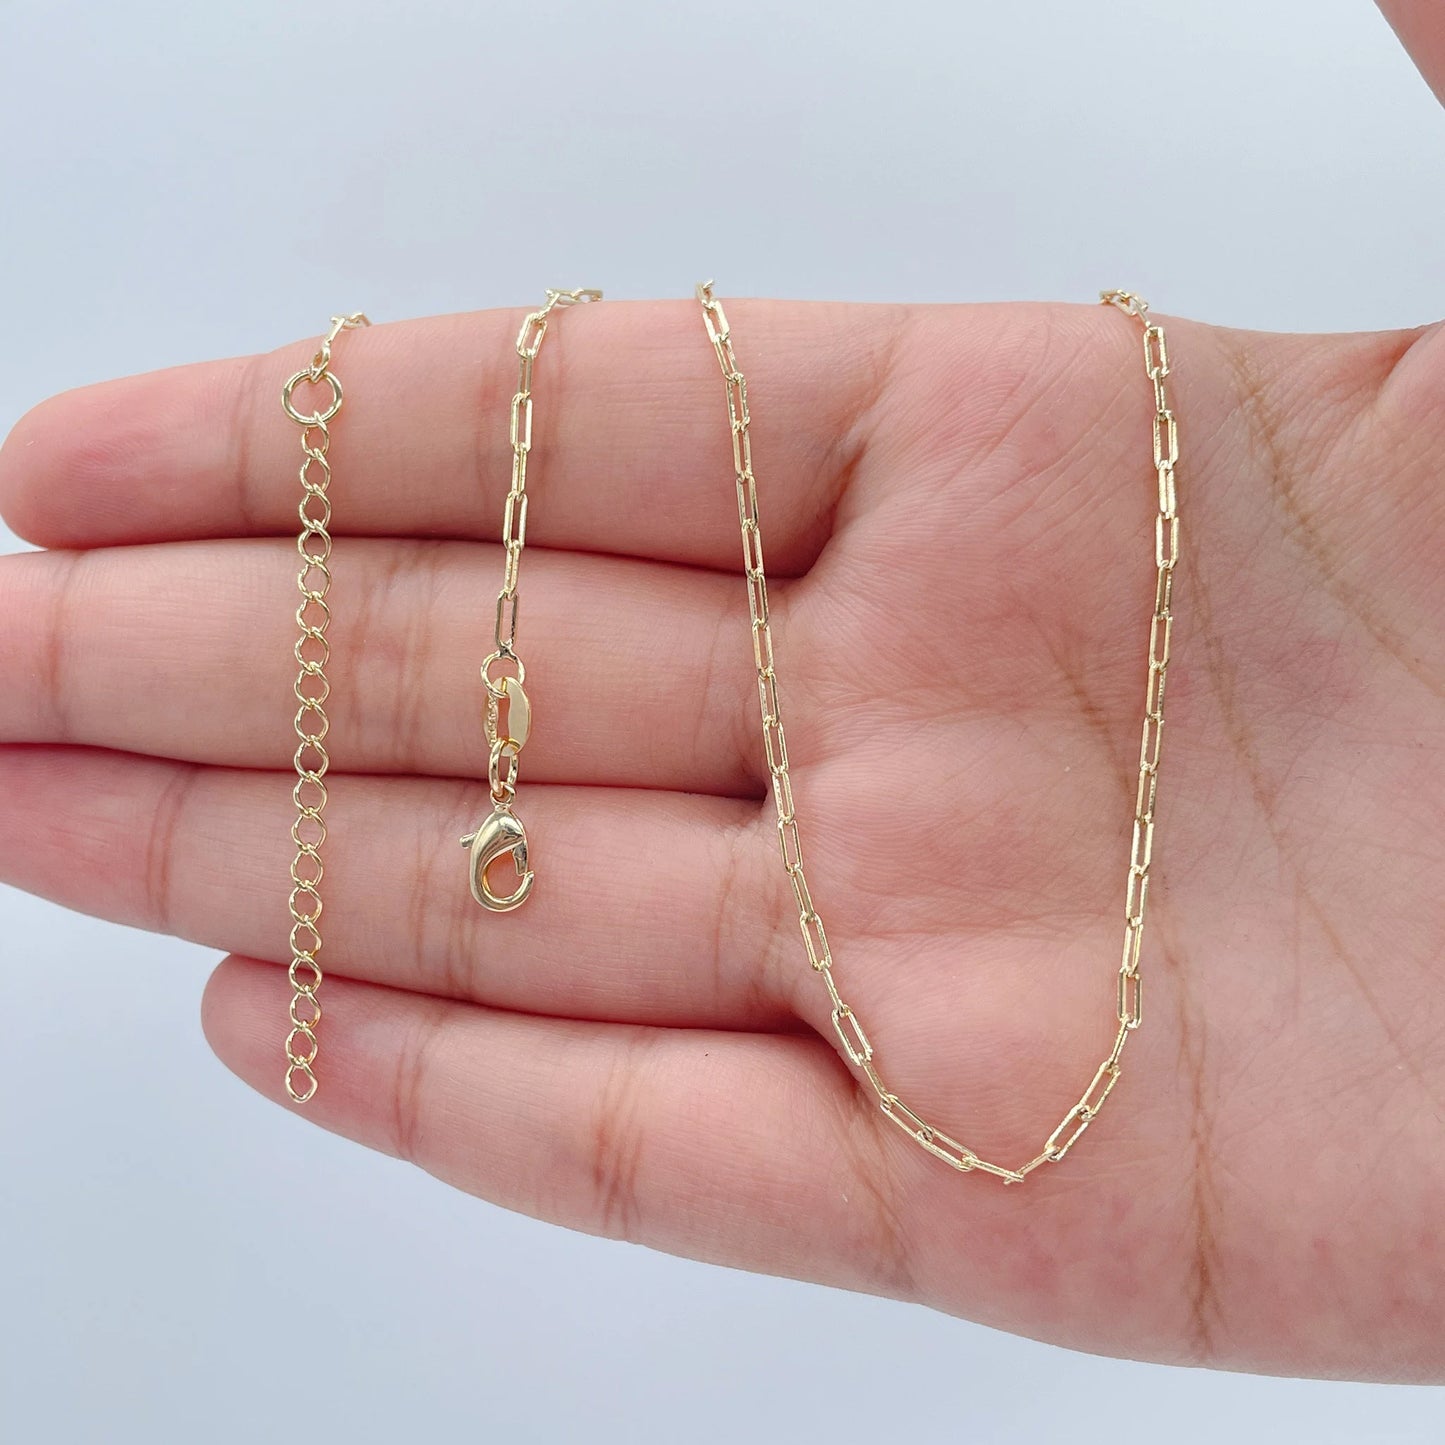 18k Gold Filled 2mm Dainty Paper Clip Chain Necklace   Supplies Creative Styling  Designers